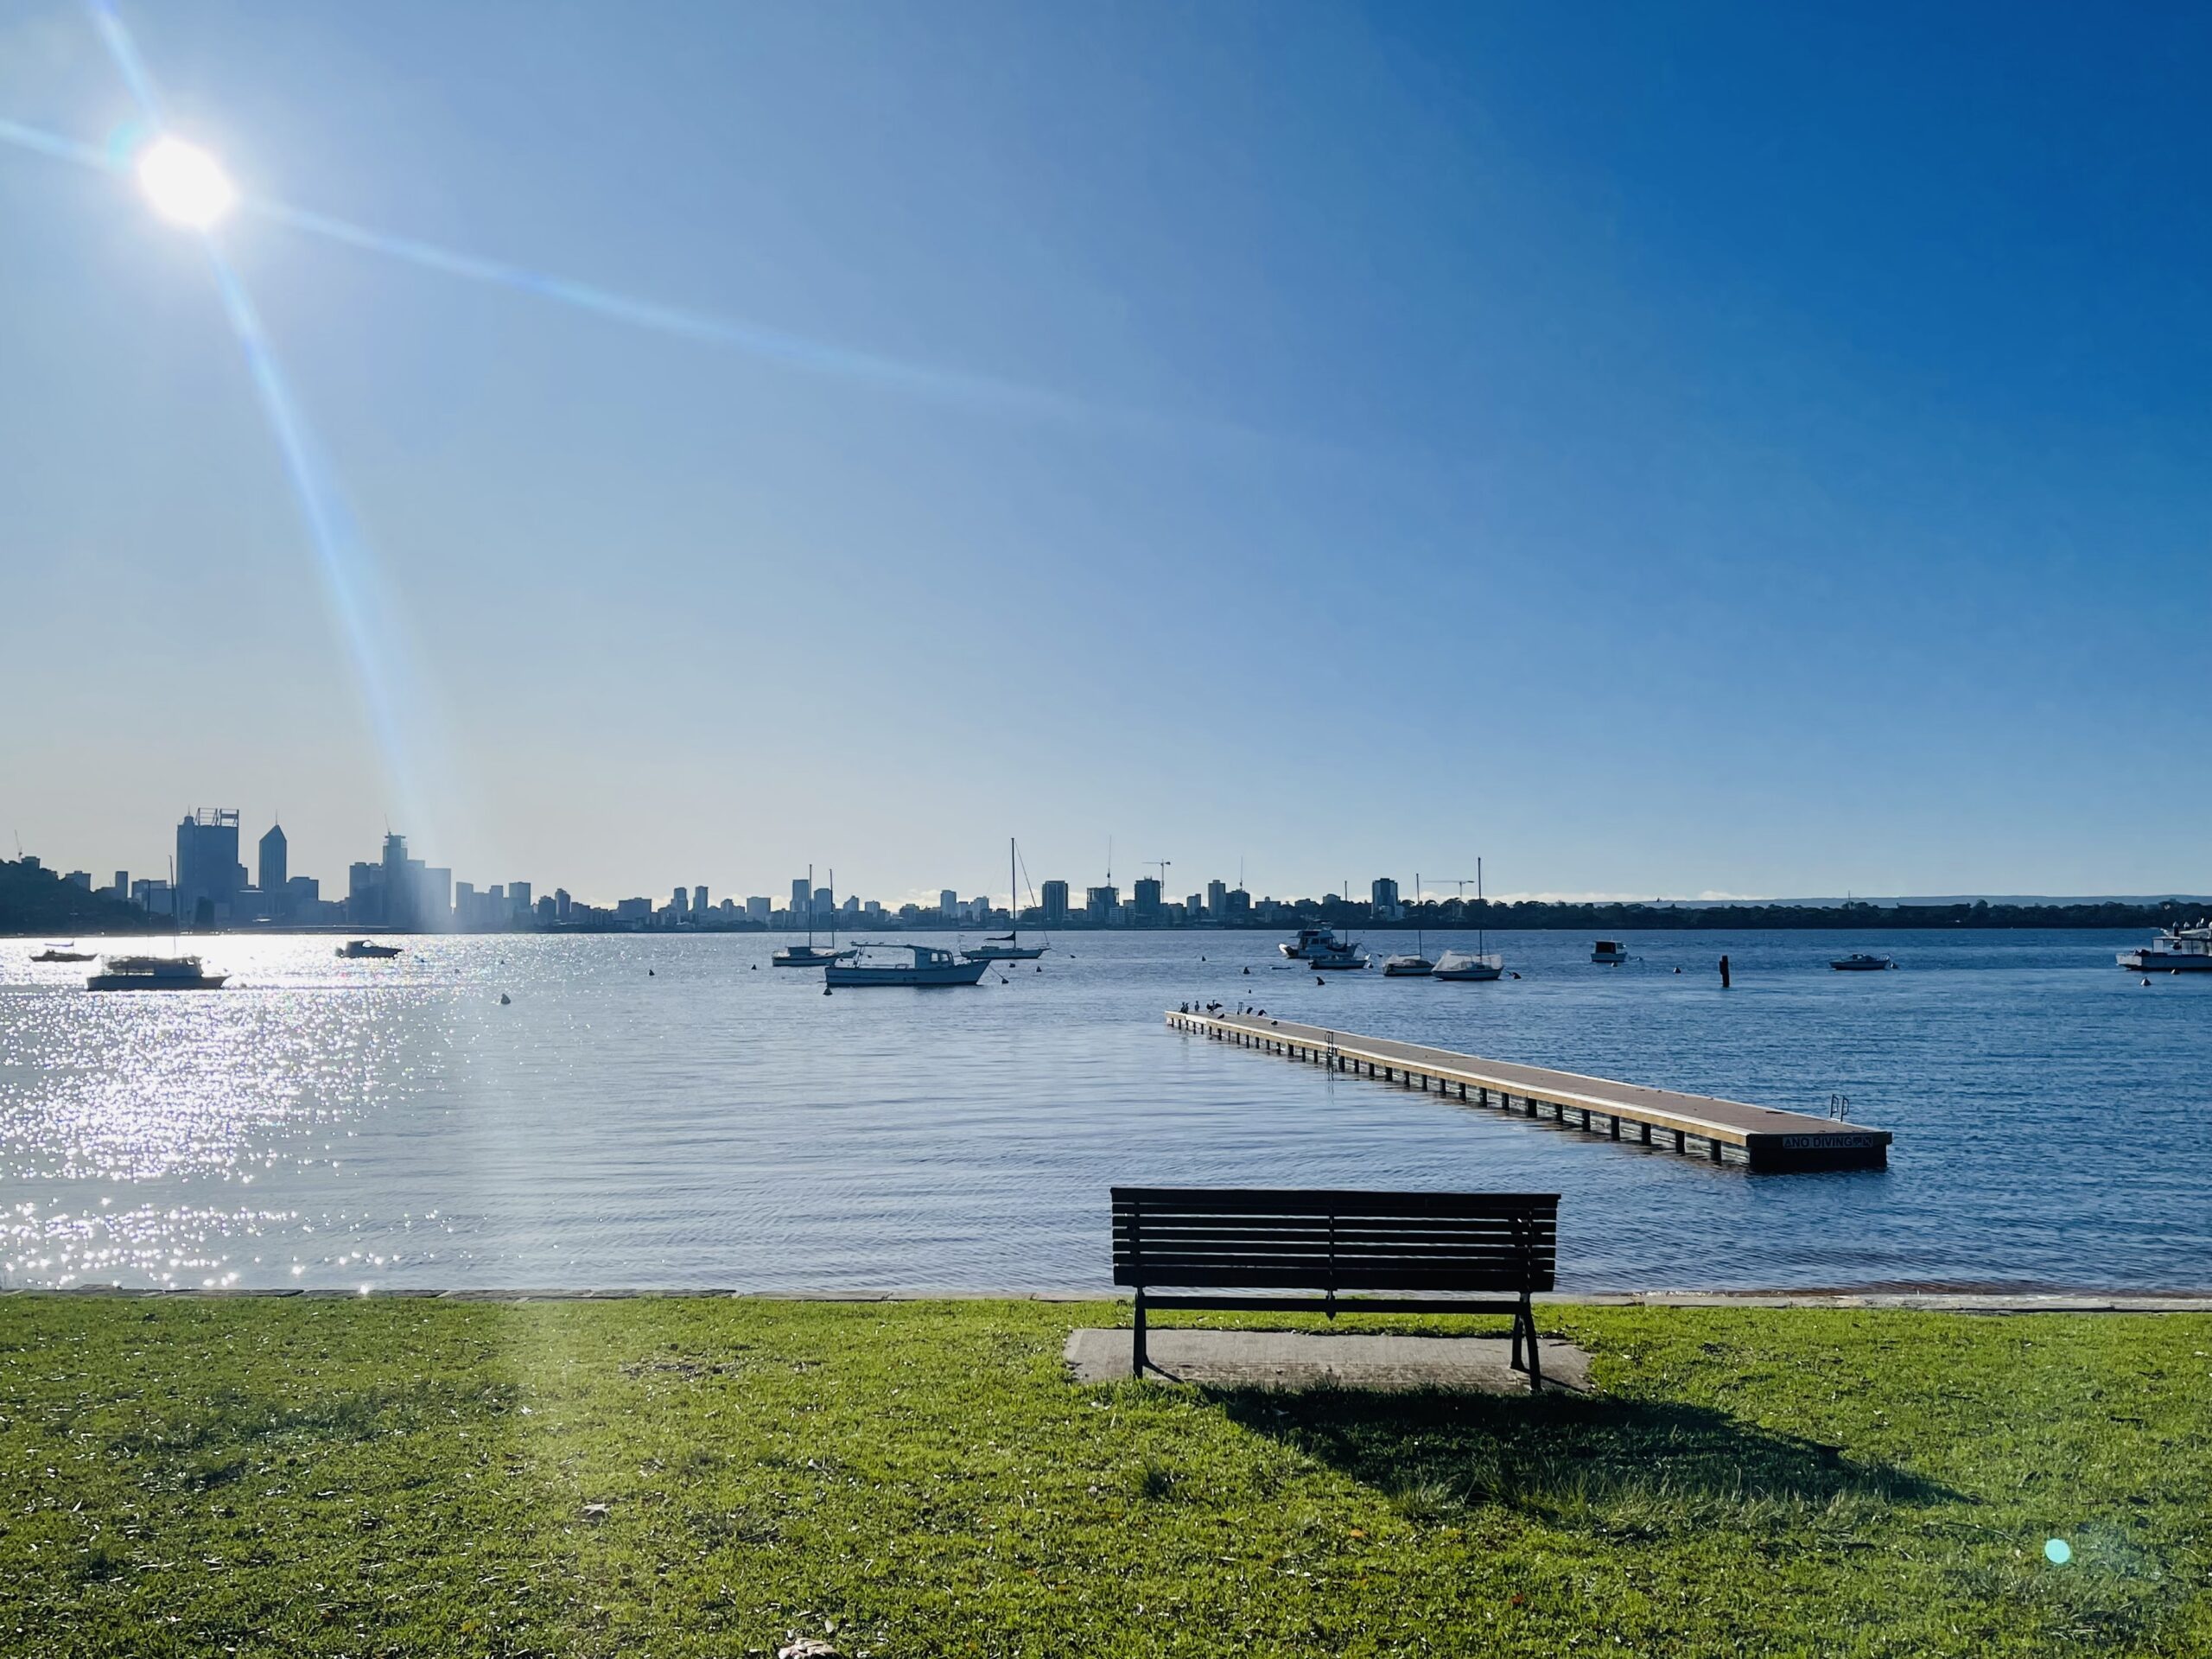 A photo of the Swan River taken from Matilda Bay Reserve. Green grass and a park bench can be seen in the foreground of the image. The midground is made up of the river, on which float a pontoon and some boats. The clear blue sky is above, and some buildings can be seen in the distance.